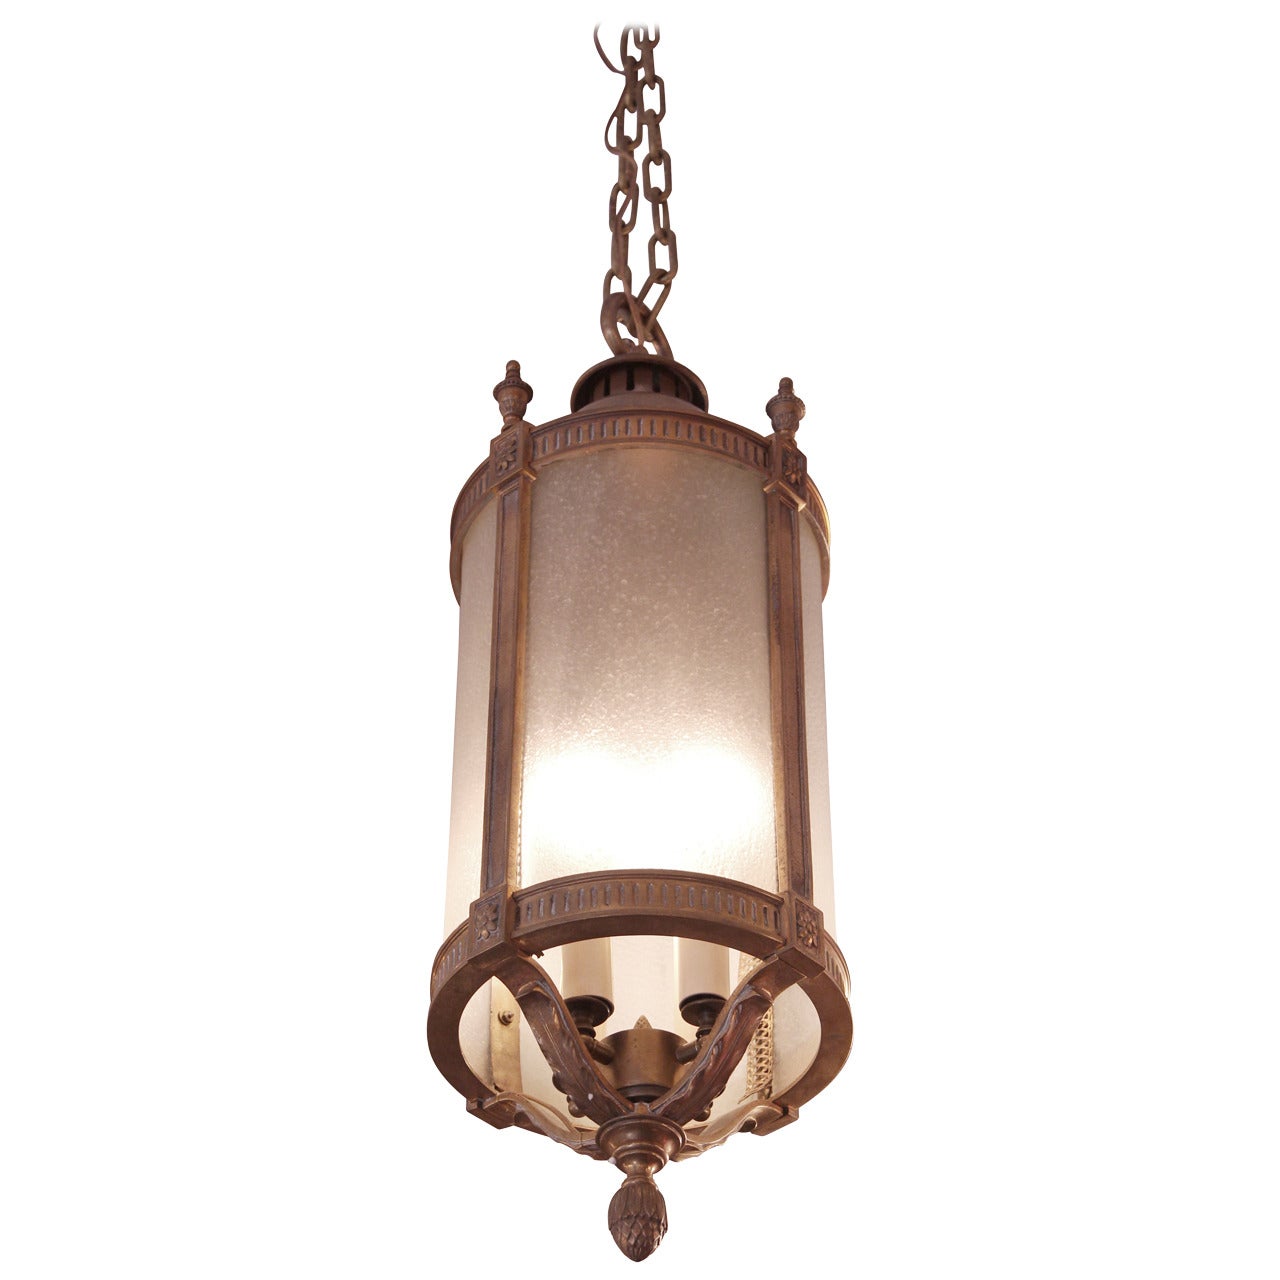 1900 Cast Bronze Lantern with Four Lights and Frosted Glass